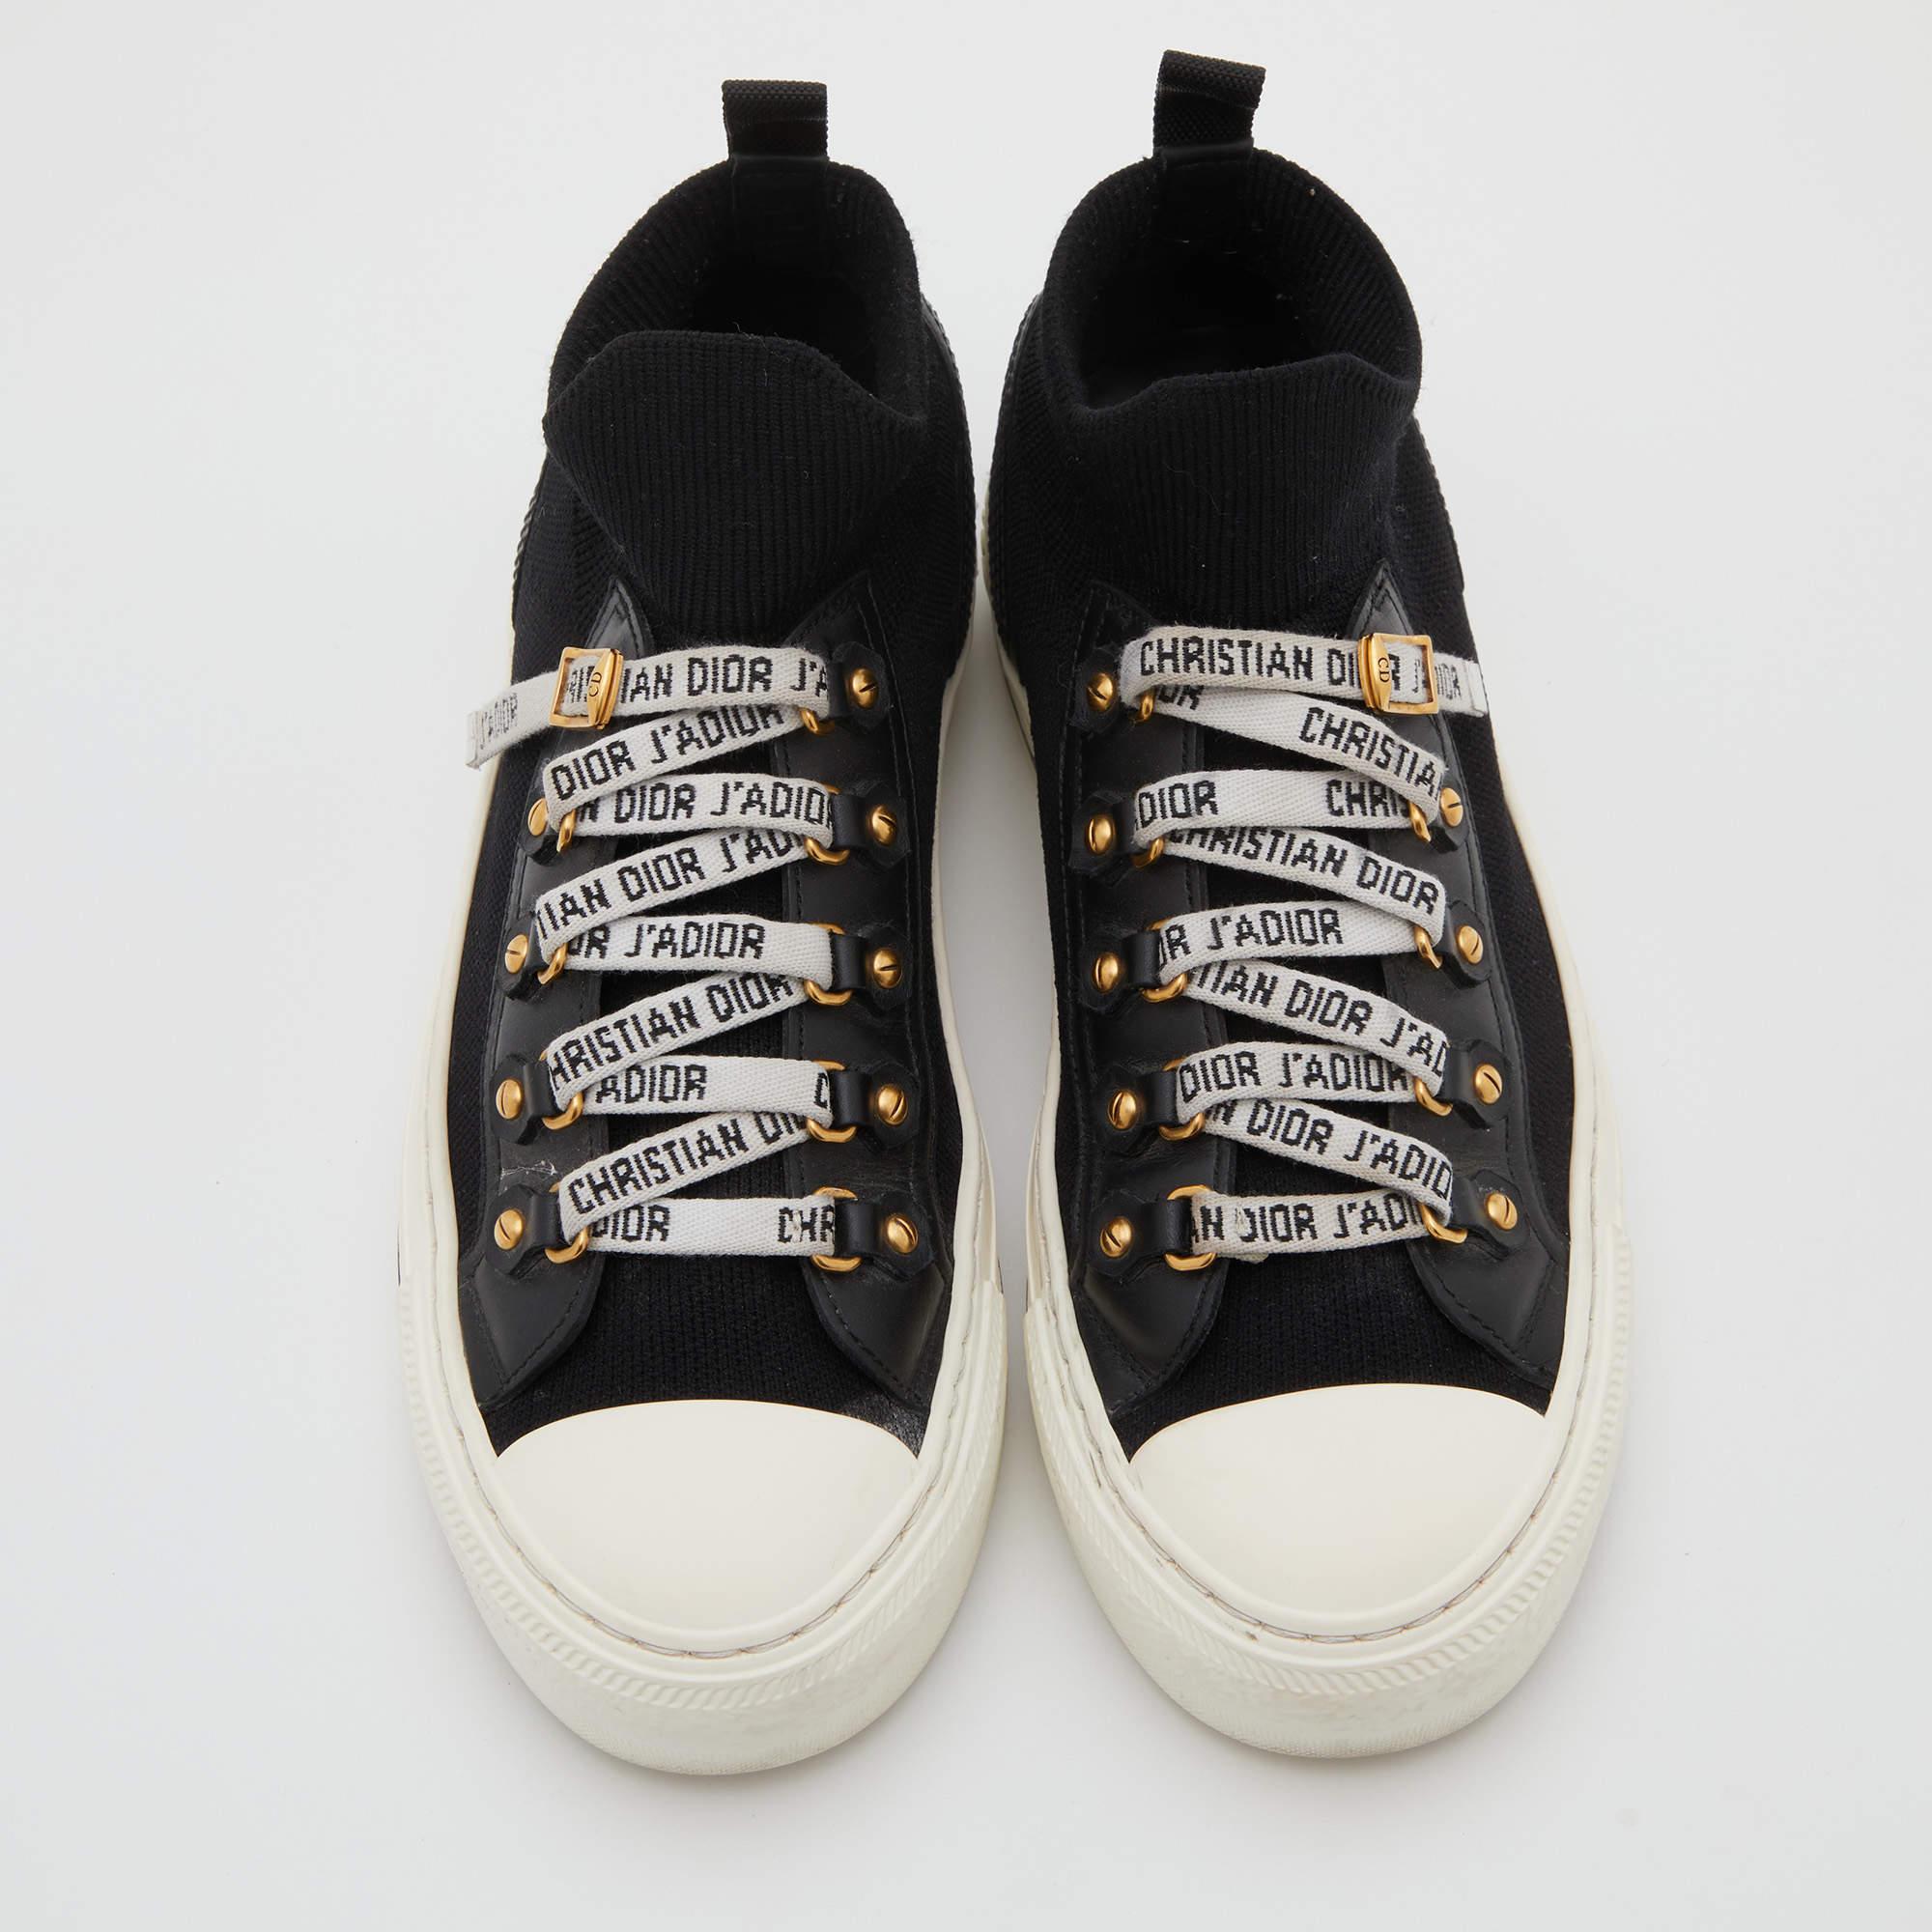 Give your outfit a chic update with this pair of designer sneakers. The creation is sewn perfectly to help you make a statement in them for a long time.

Includes
Original Dustbag